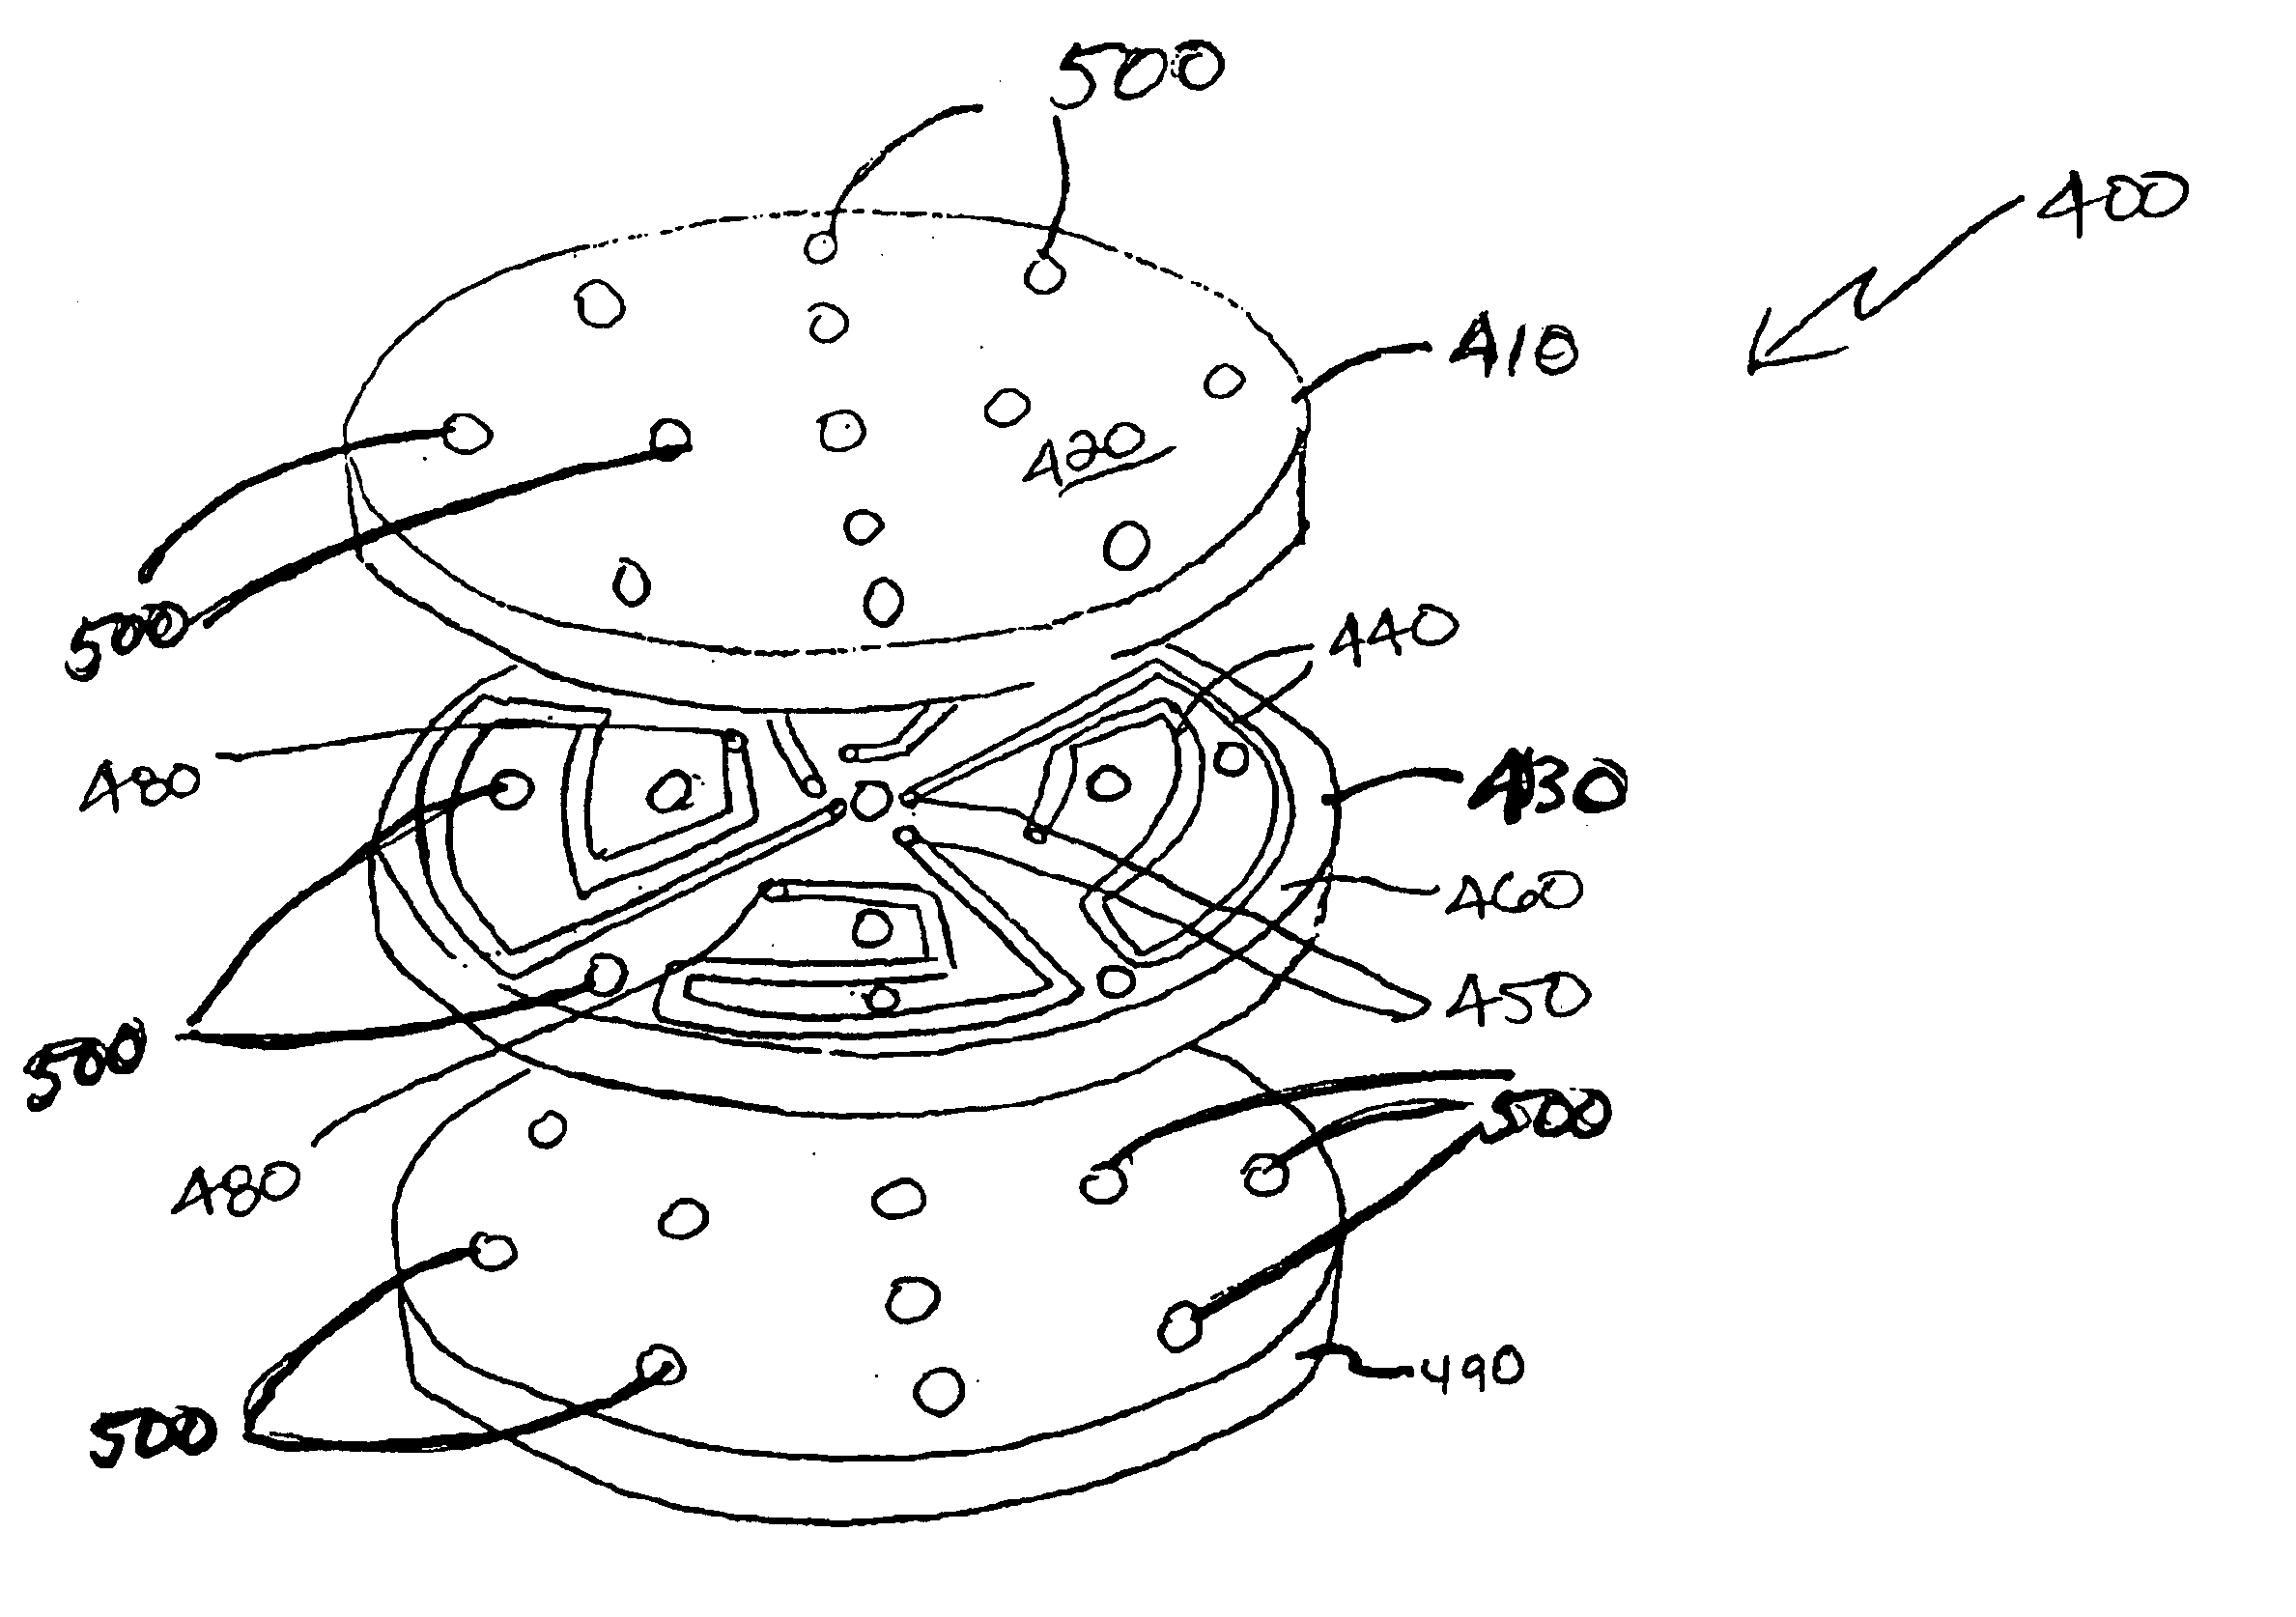 Apparatus and process for polishing a workpiece